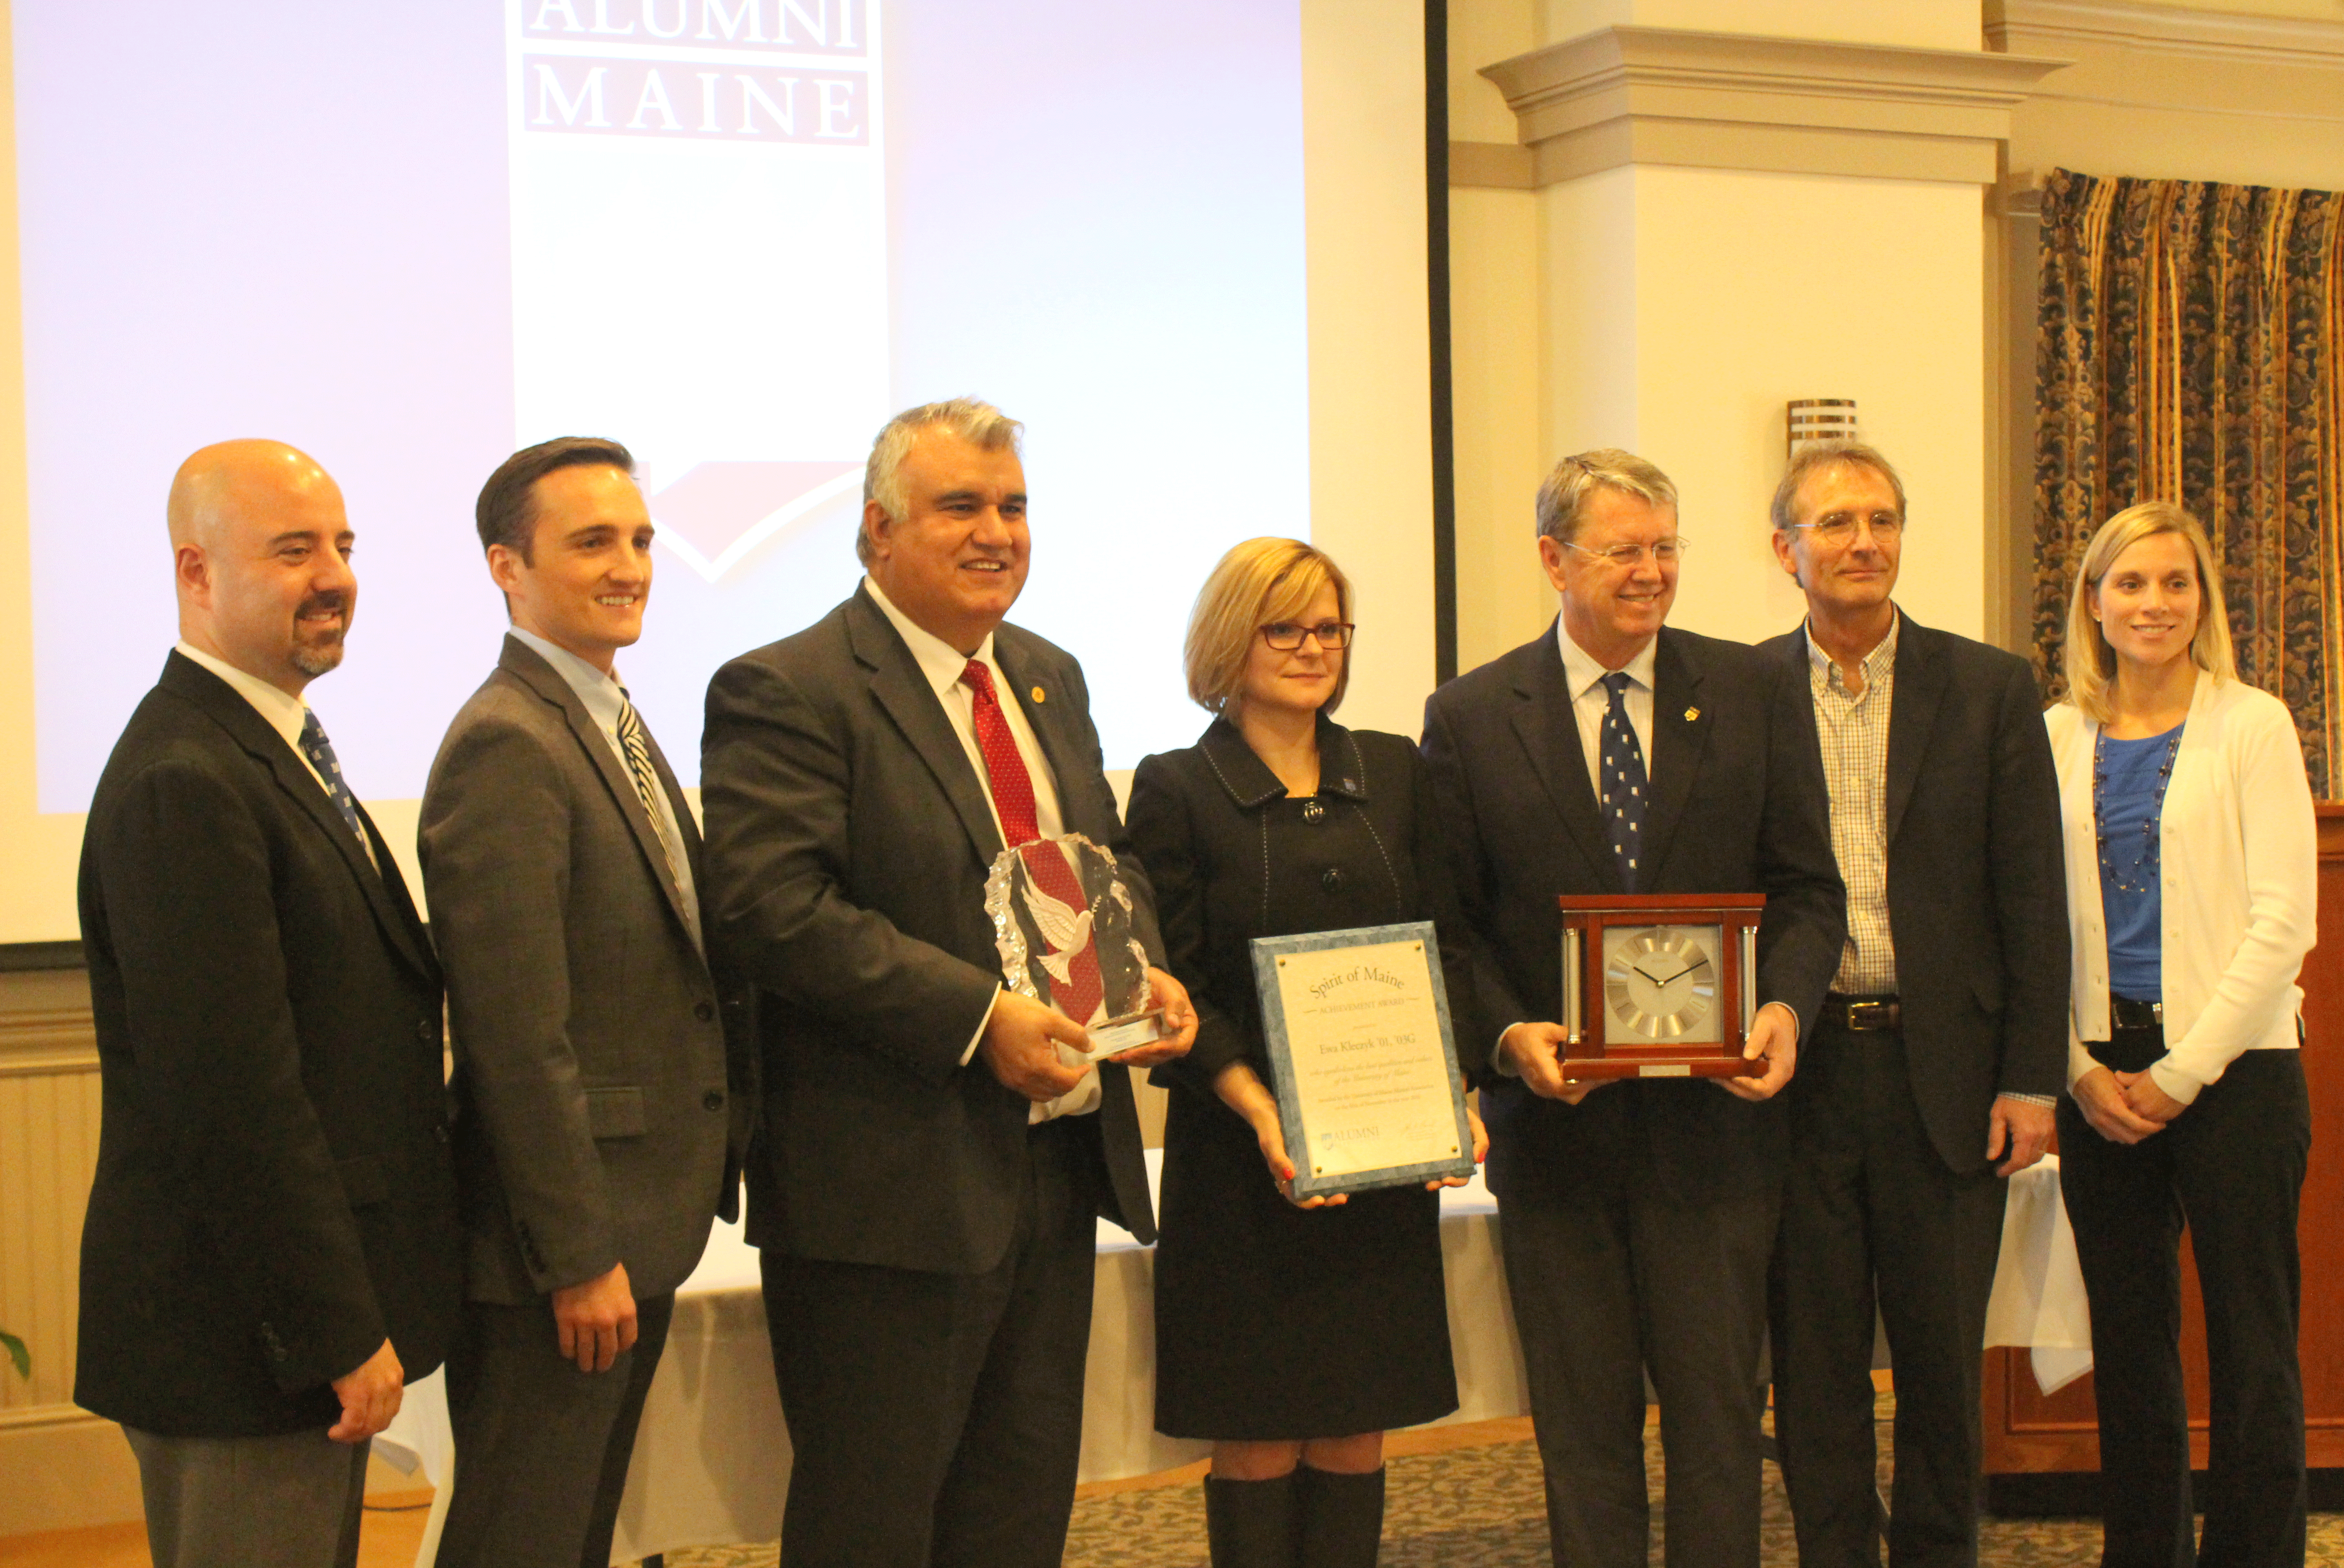 Dr. Mian Riaz (third from left) accepts his award during a ceremony hosted by the University of Maine Alumni Association.